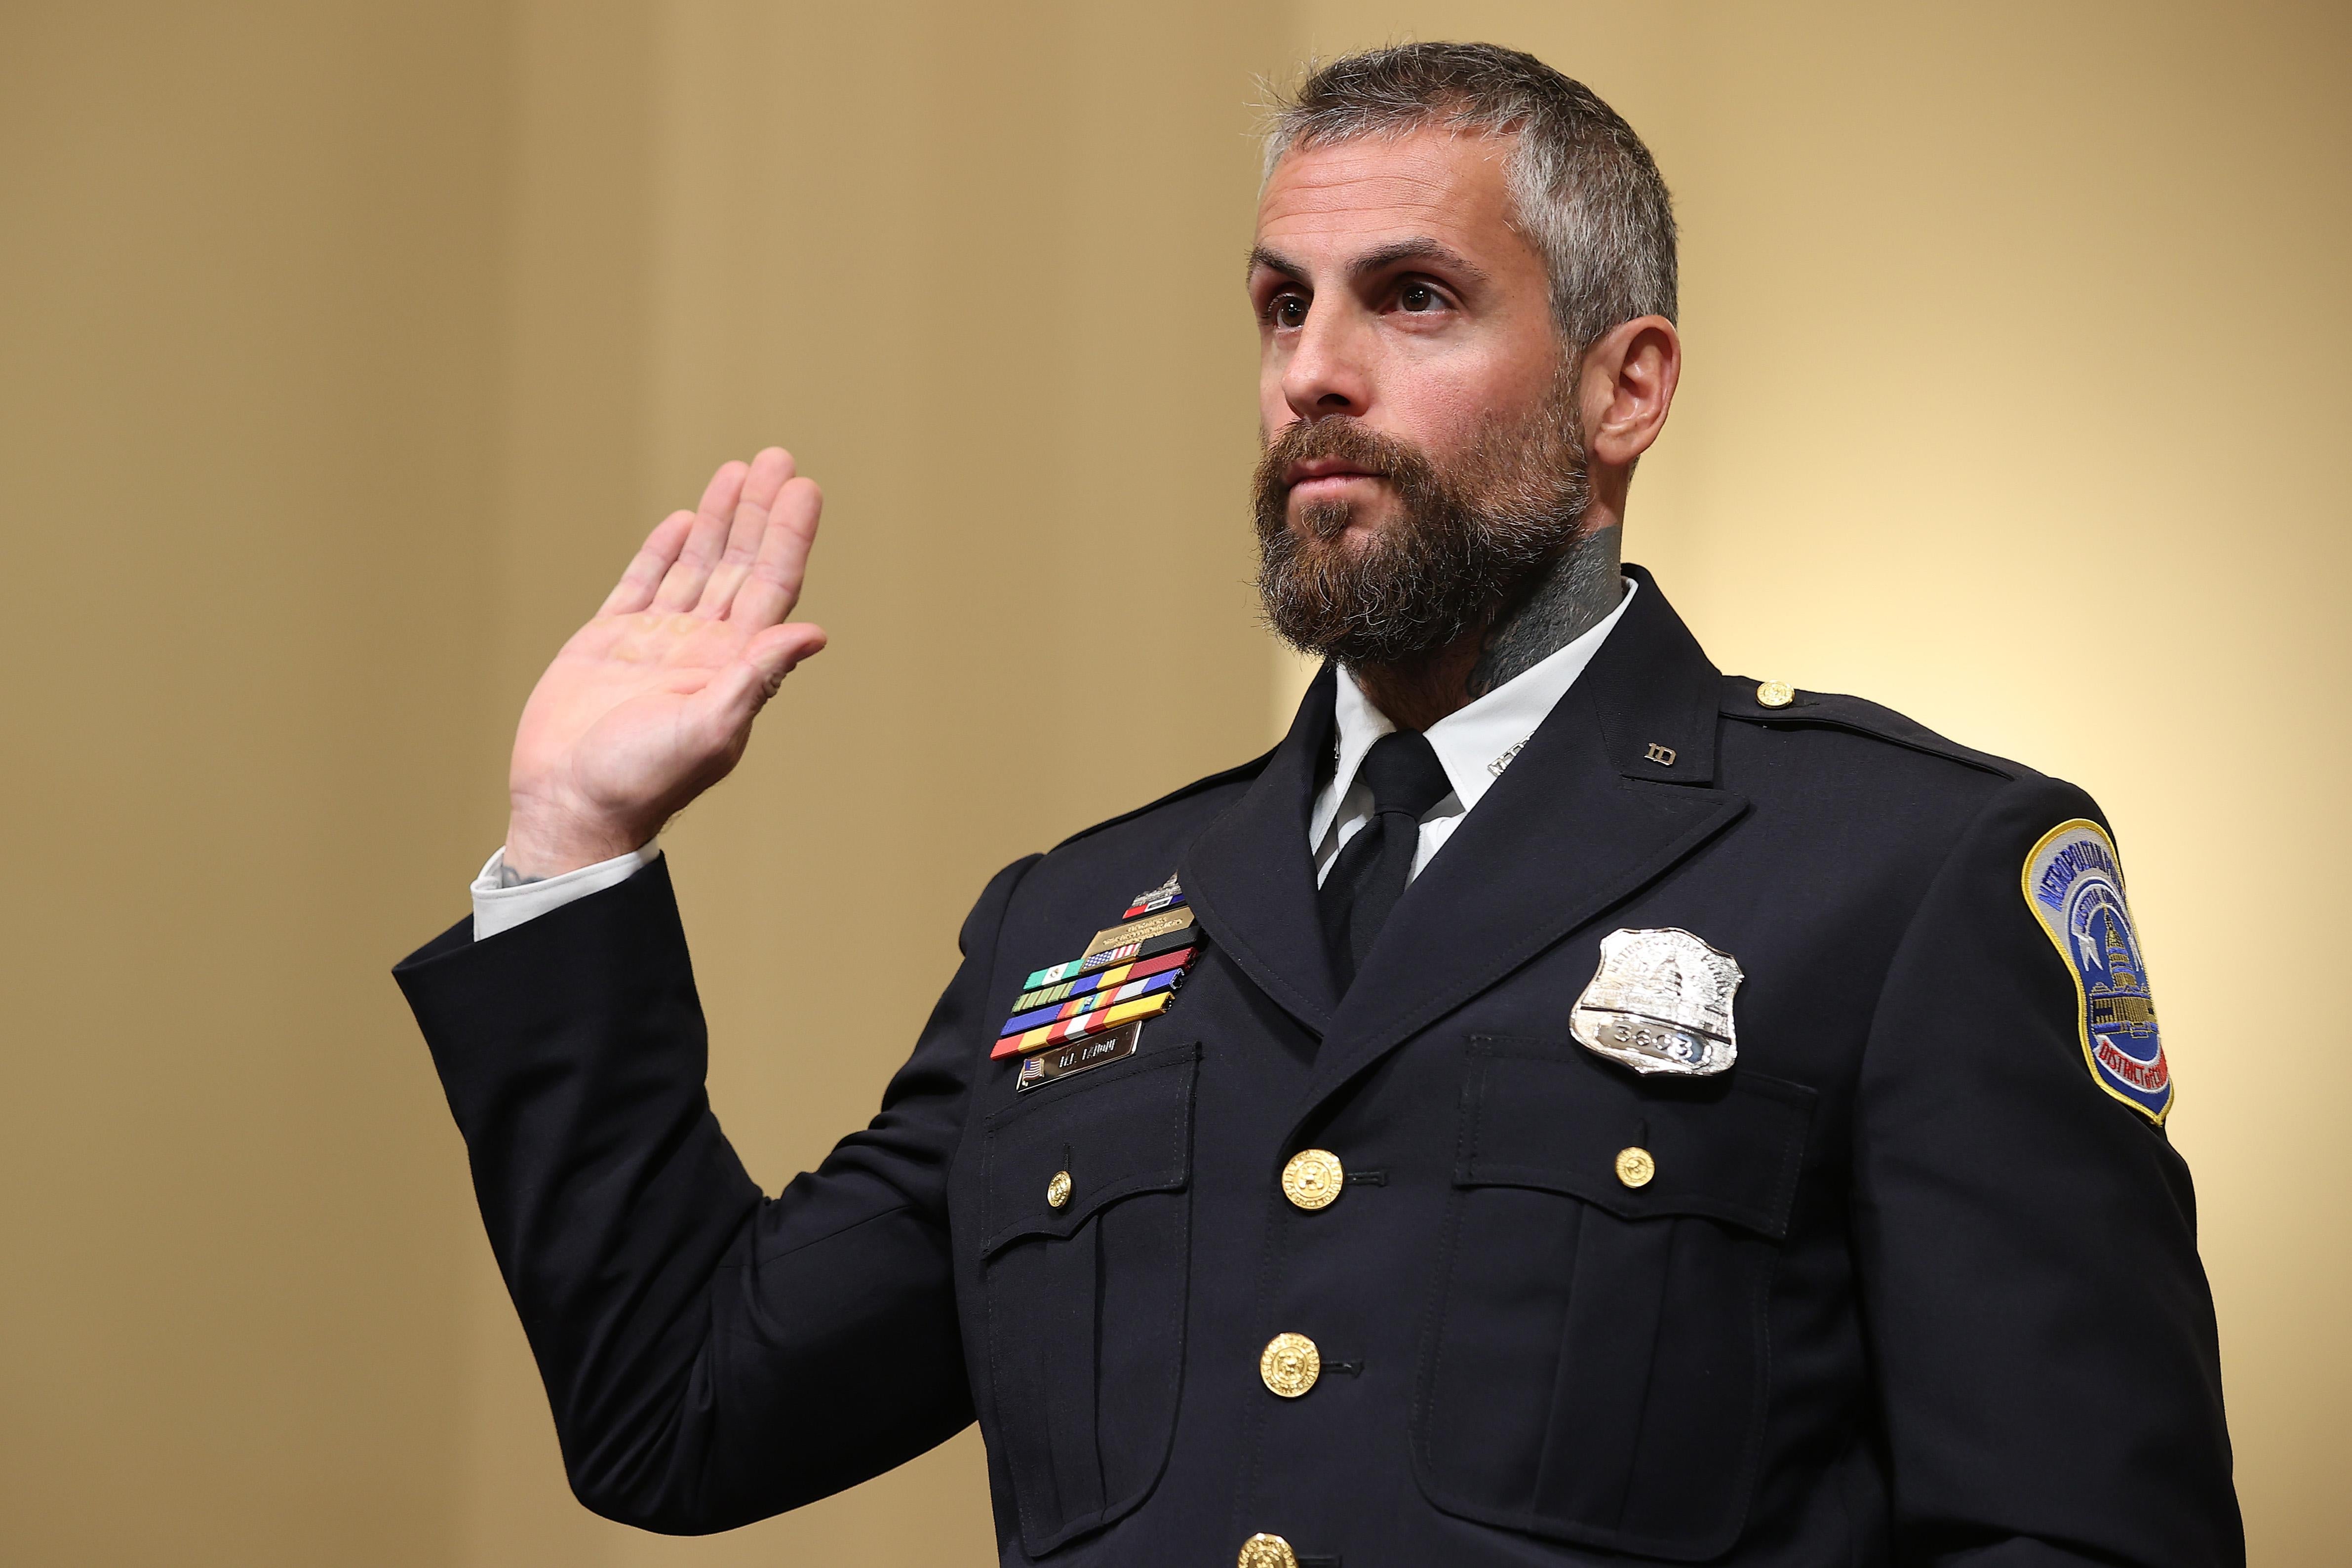 In his officer uniform, Fanone raises his right hand to swear to tell the truth.